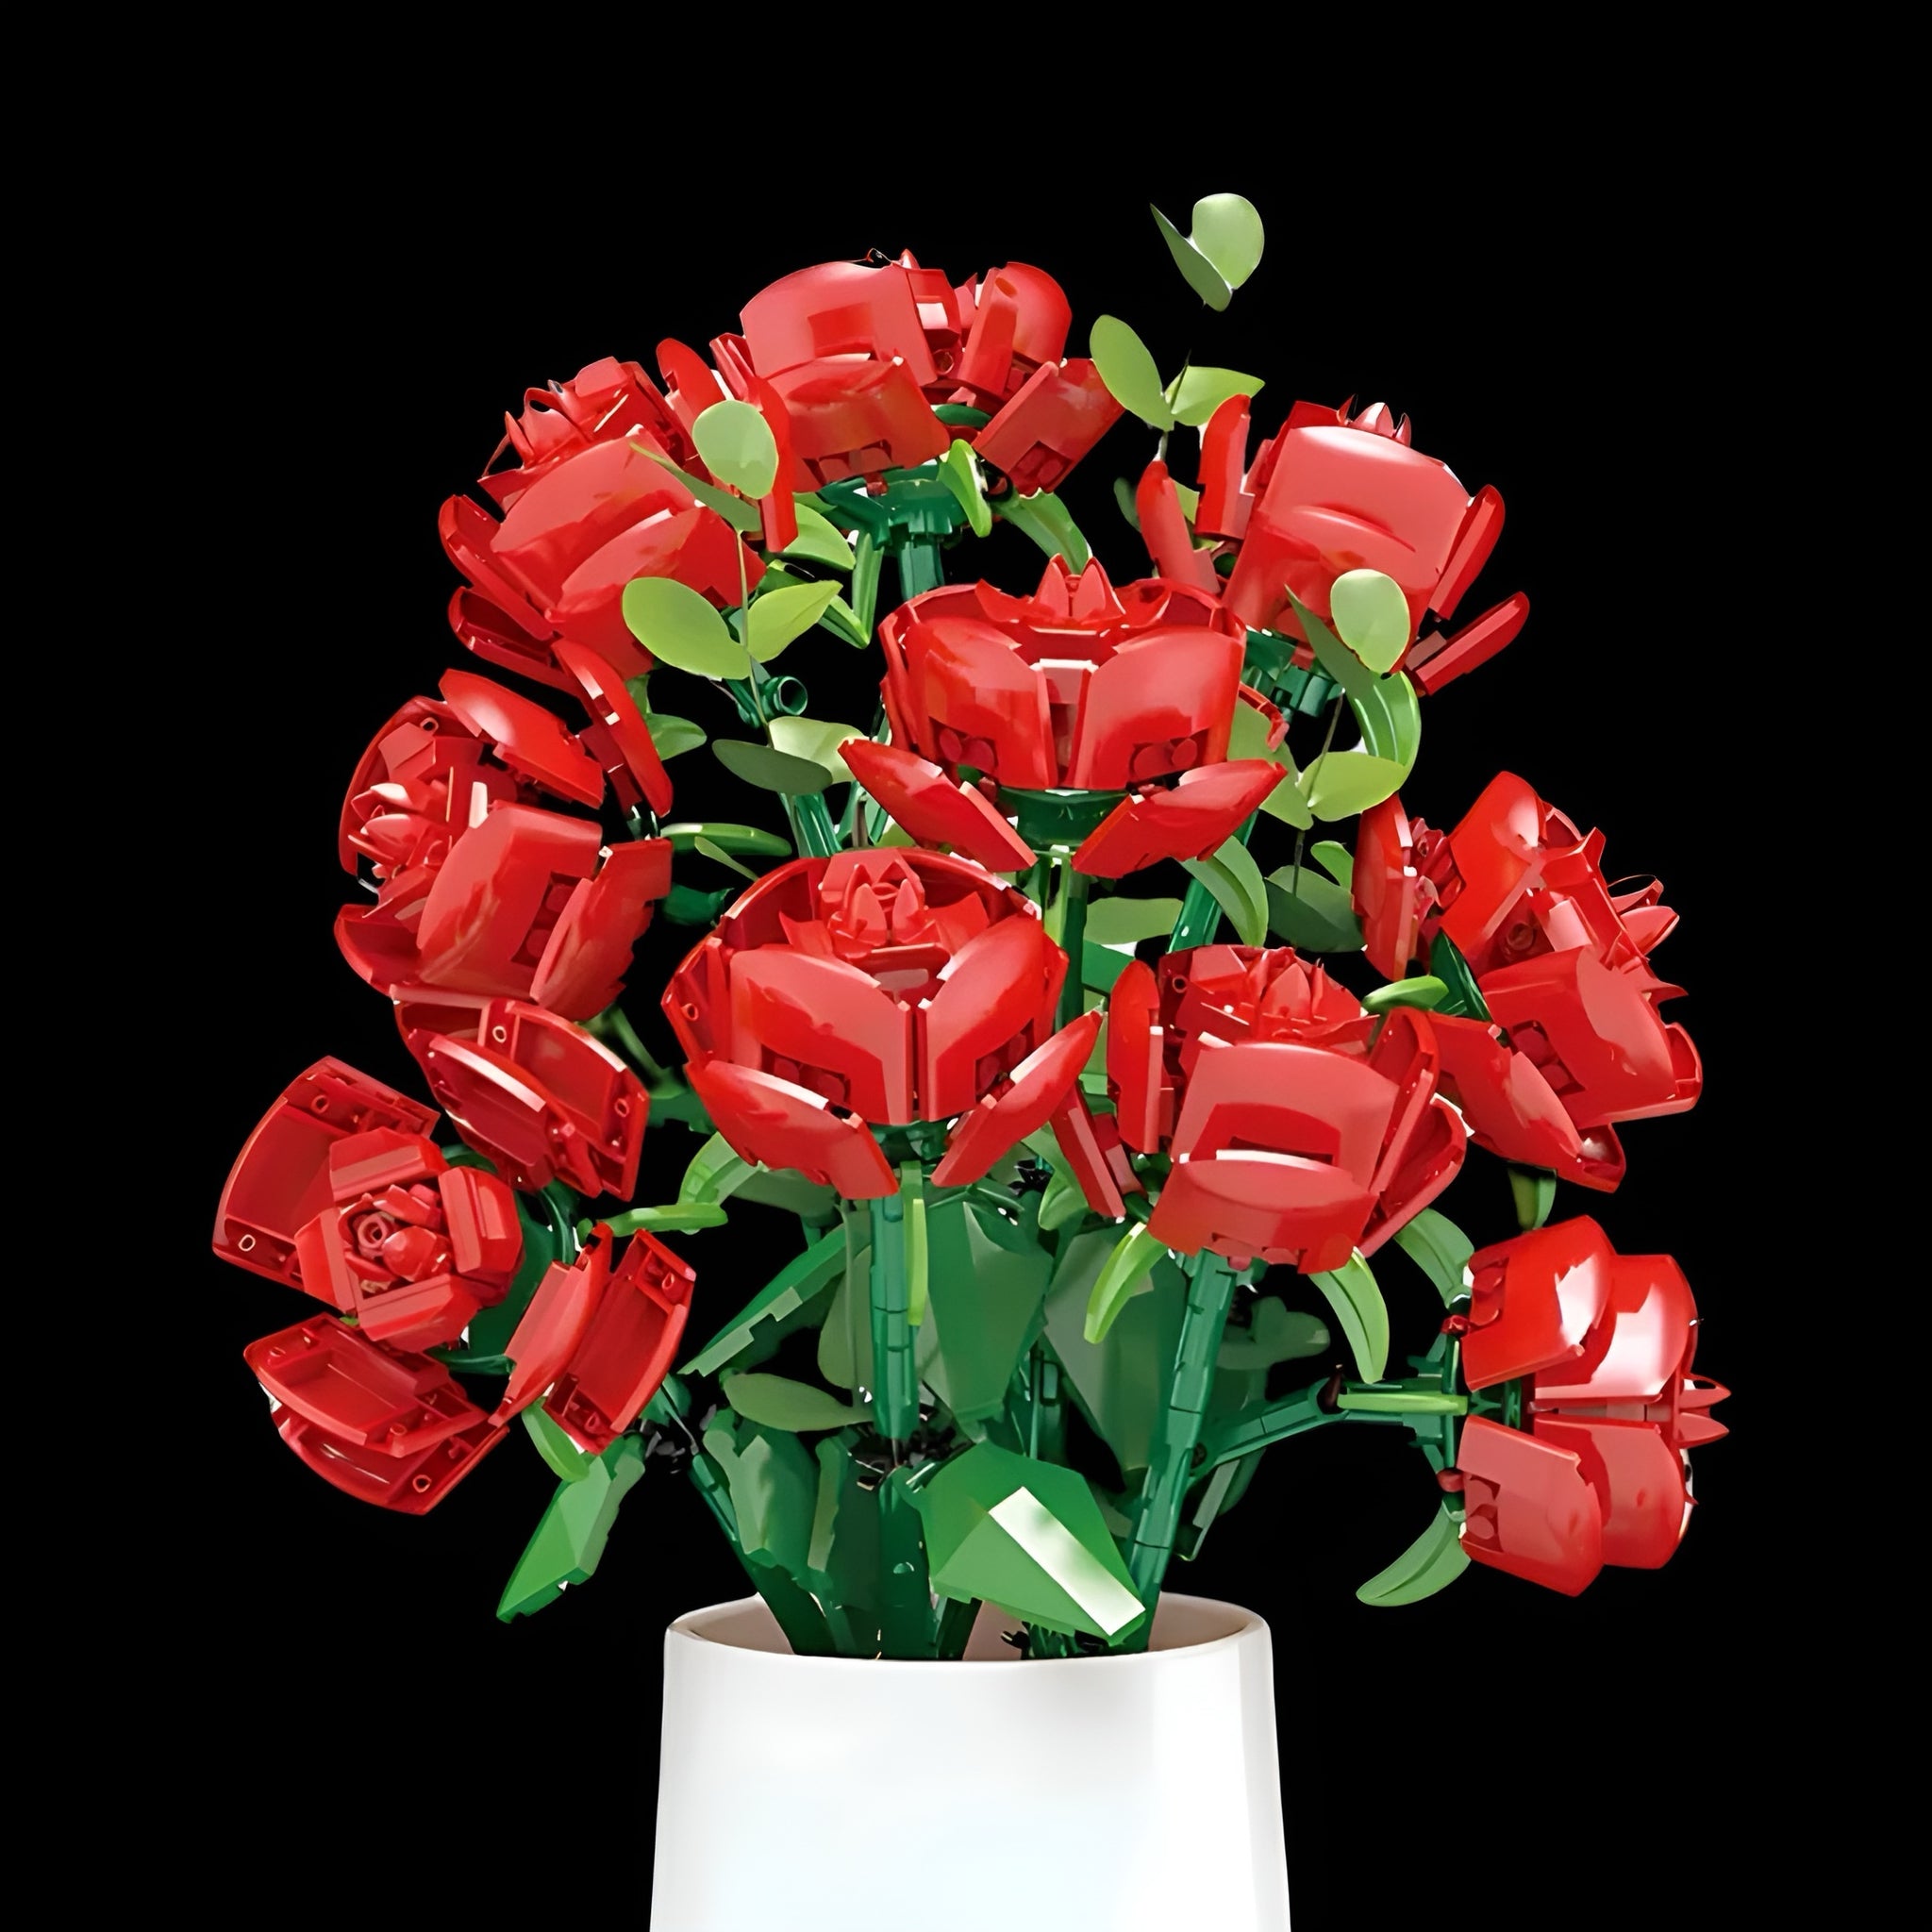 “The 11 Roses” – Bricked Bouquet